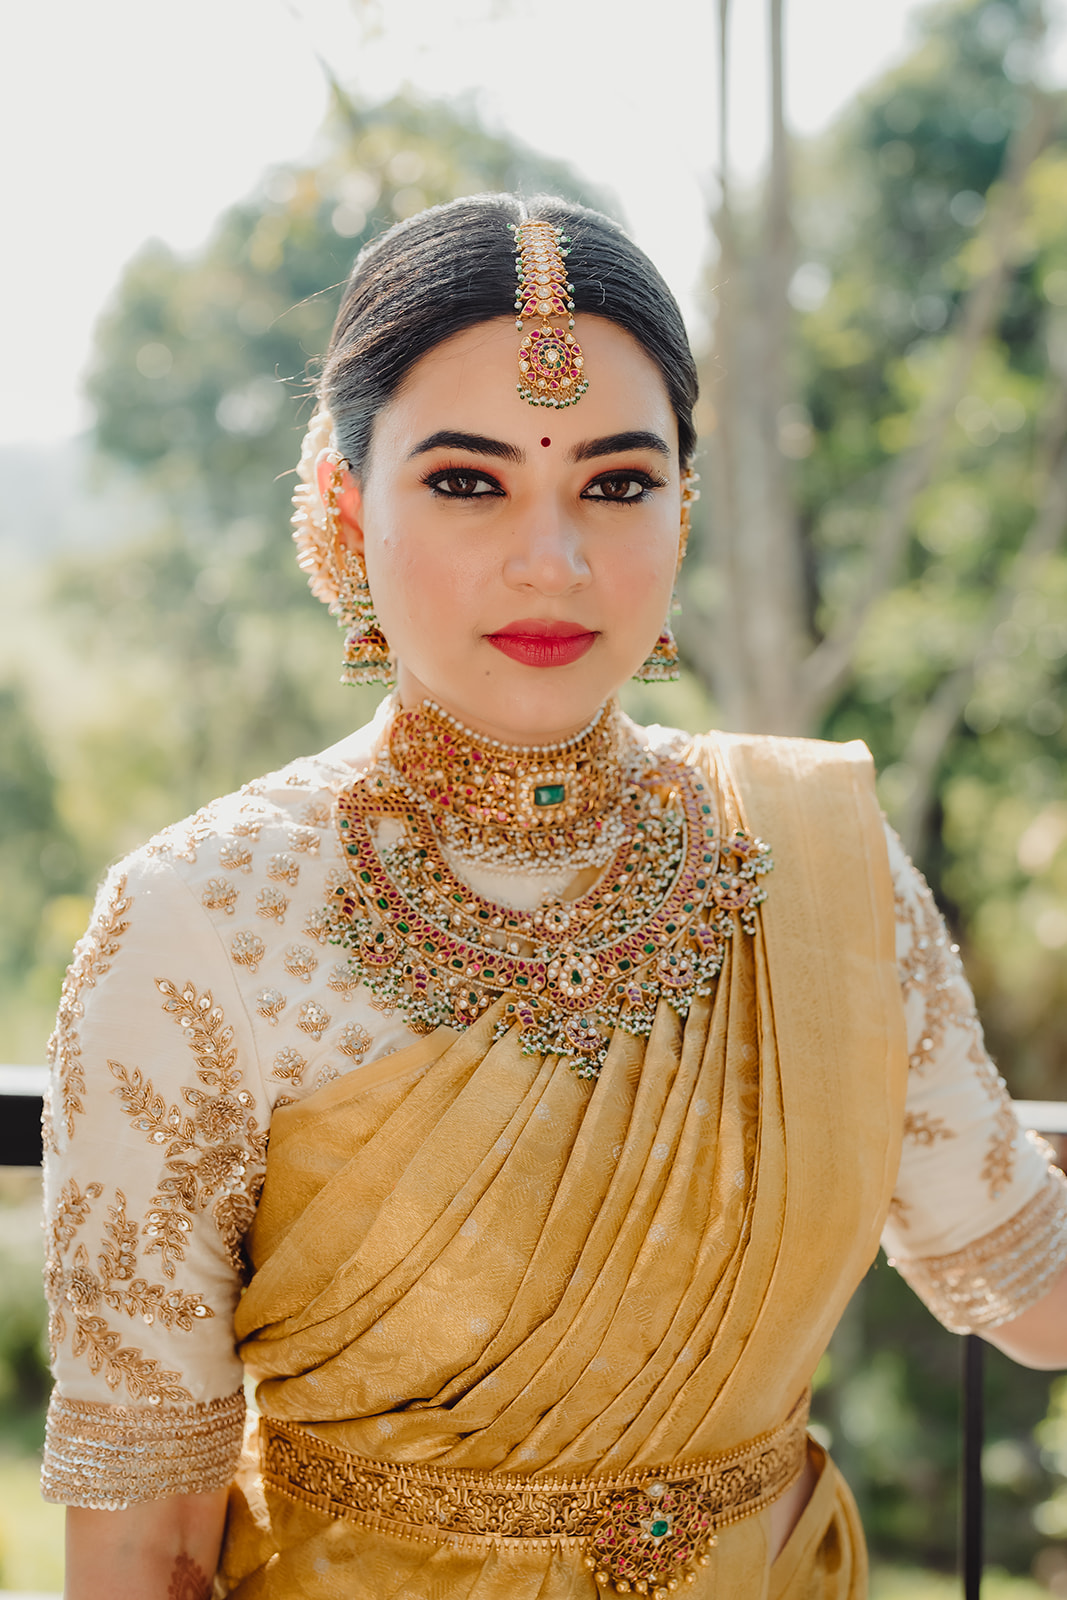 Bridal perfection: A captivating moment as the bride showcases her wedding attire with poise